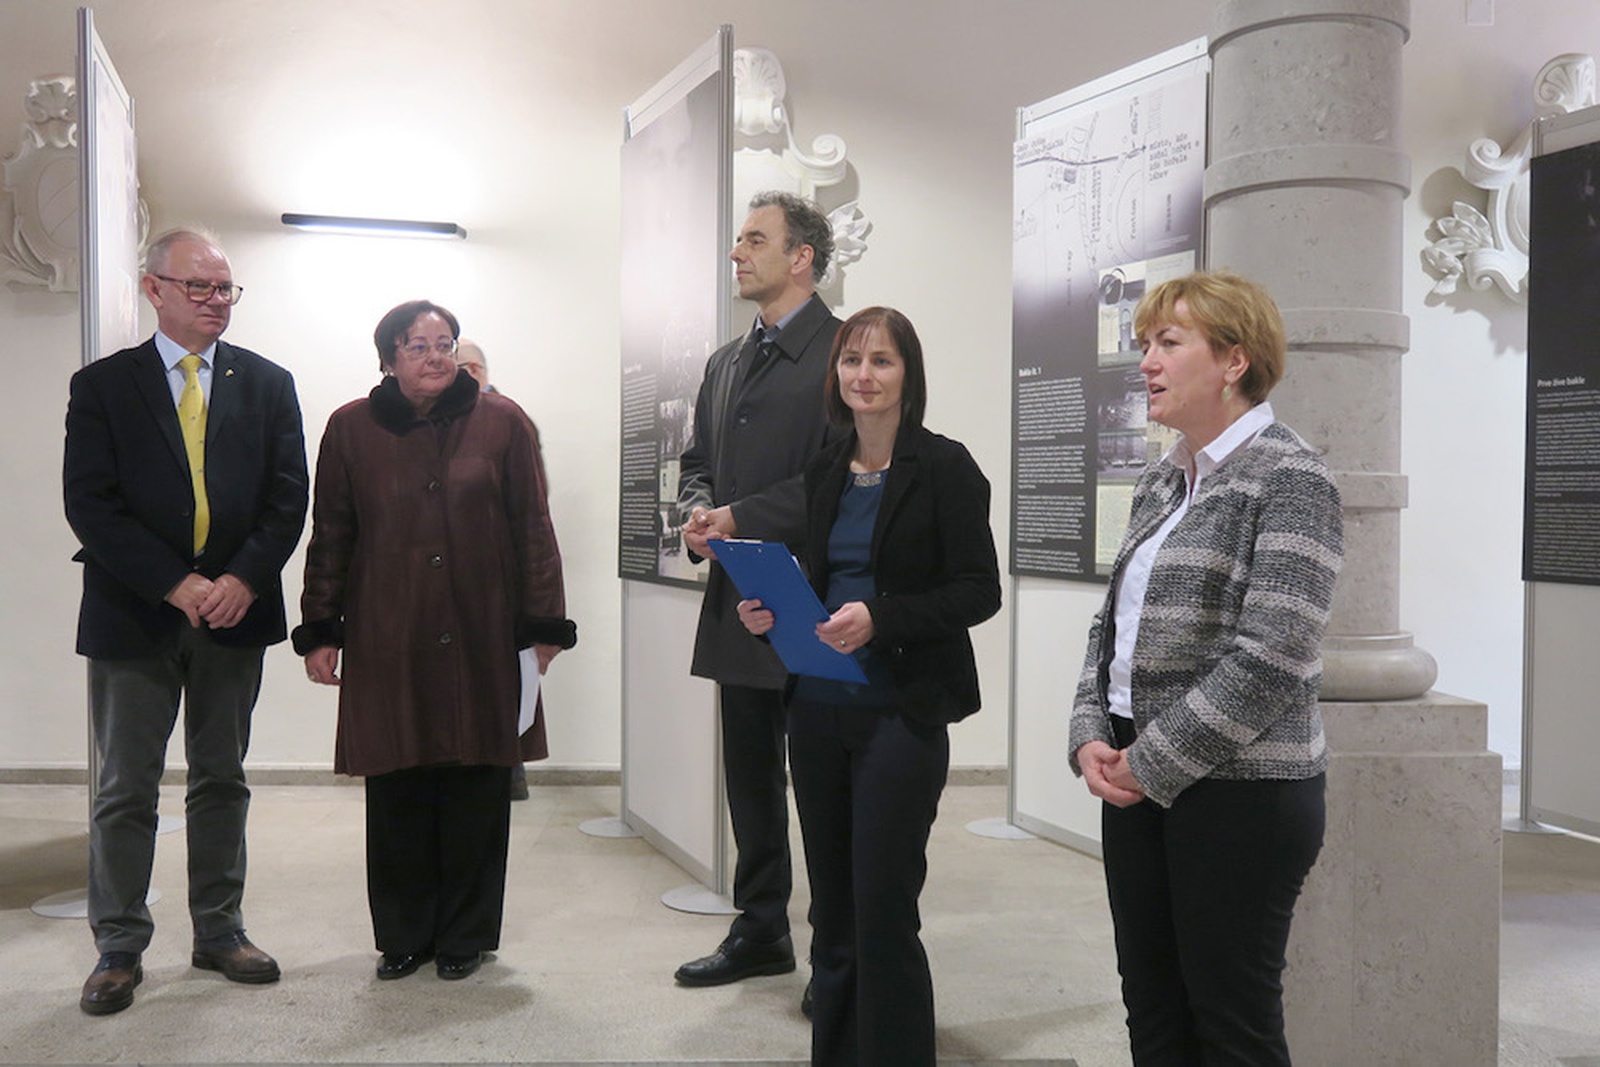 The Opening of the Exhibition “ JAN PALACH 69”